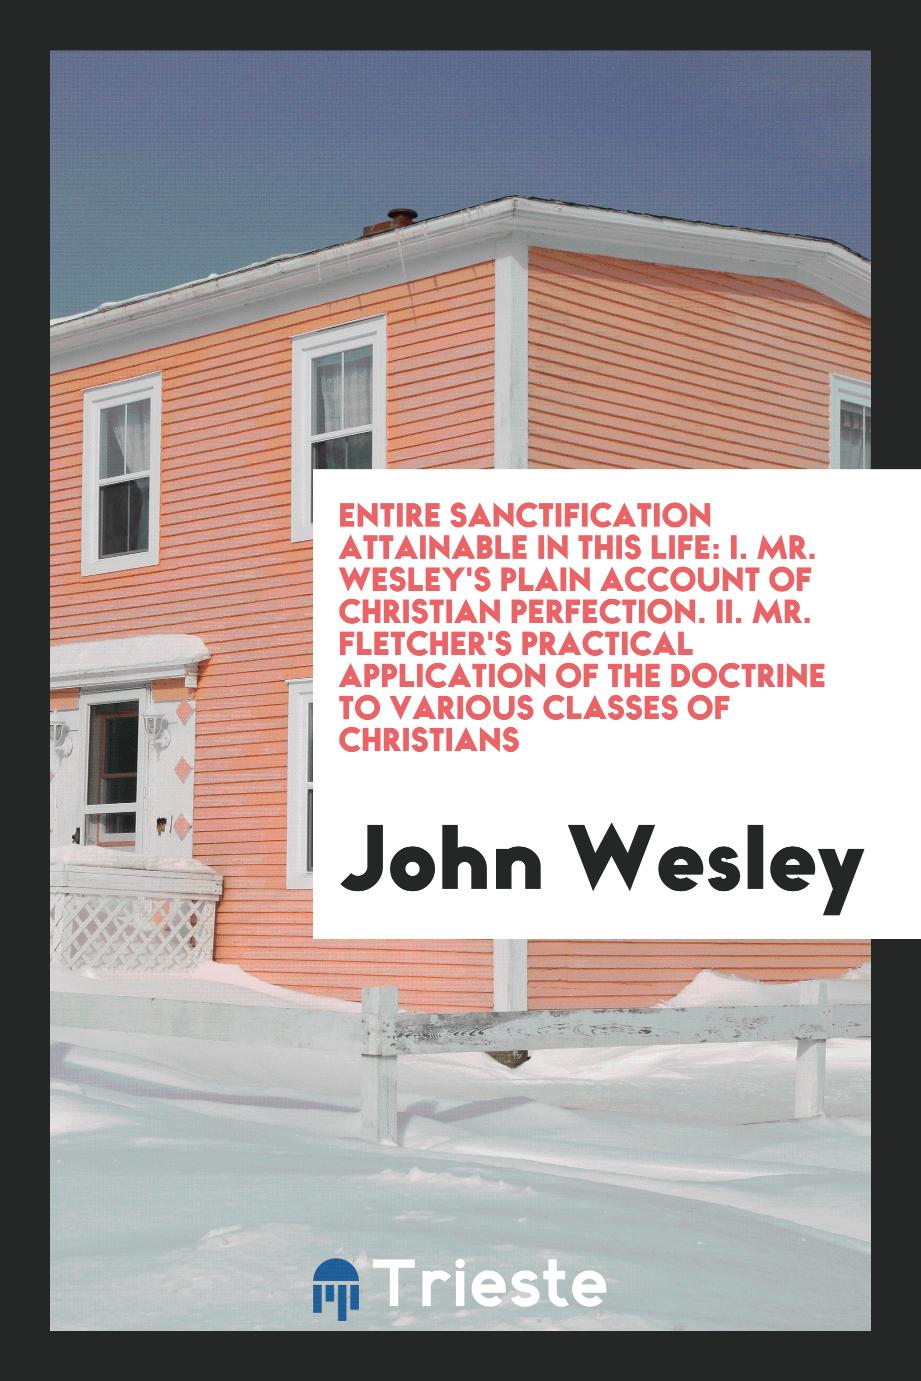 Entire sanctification attainable in this life: I. Mr. Wesley's Plain account of Christian perfection. II. Mr. Fletcher's Practical application of the doctrine to various classes of Christians